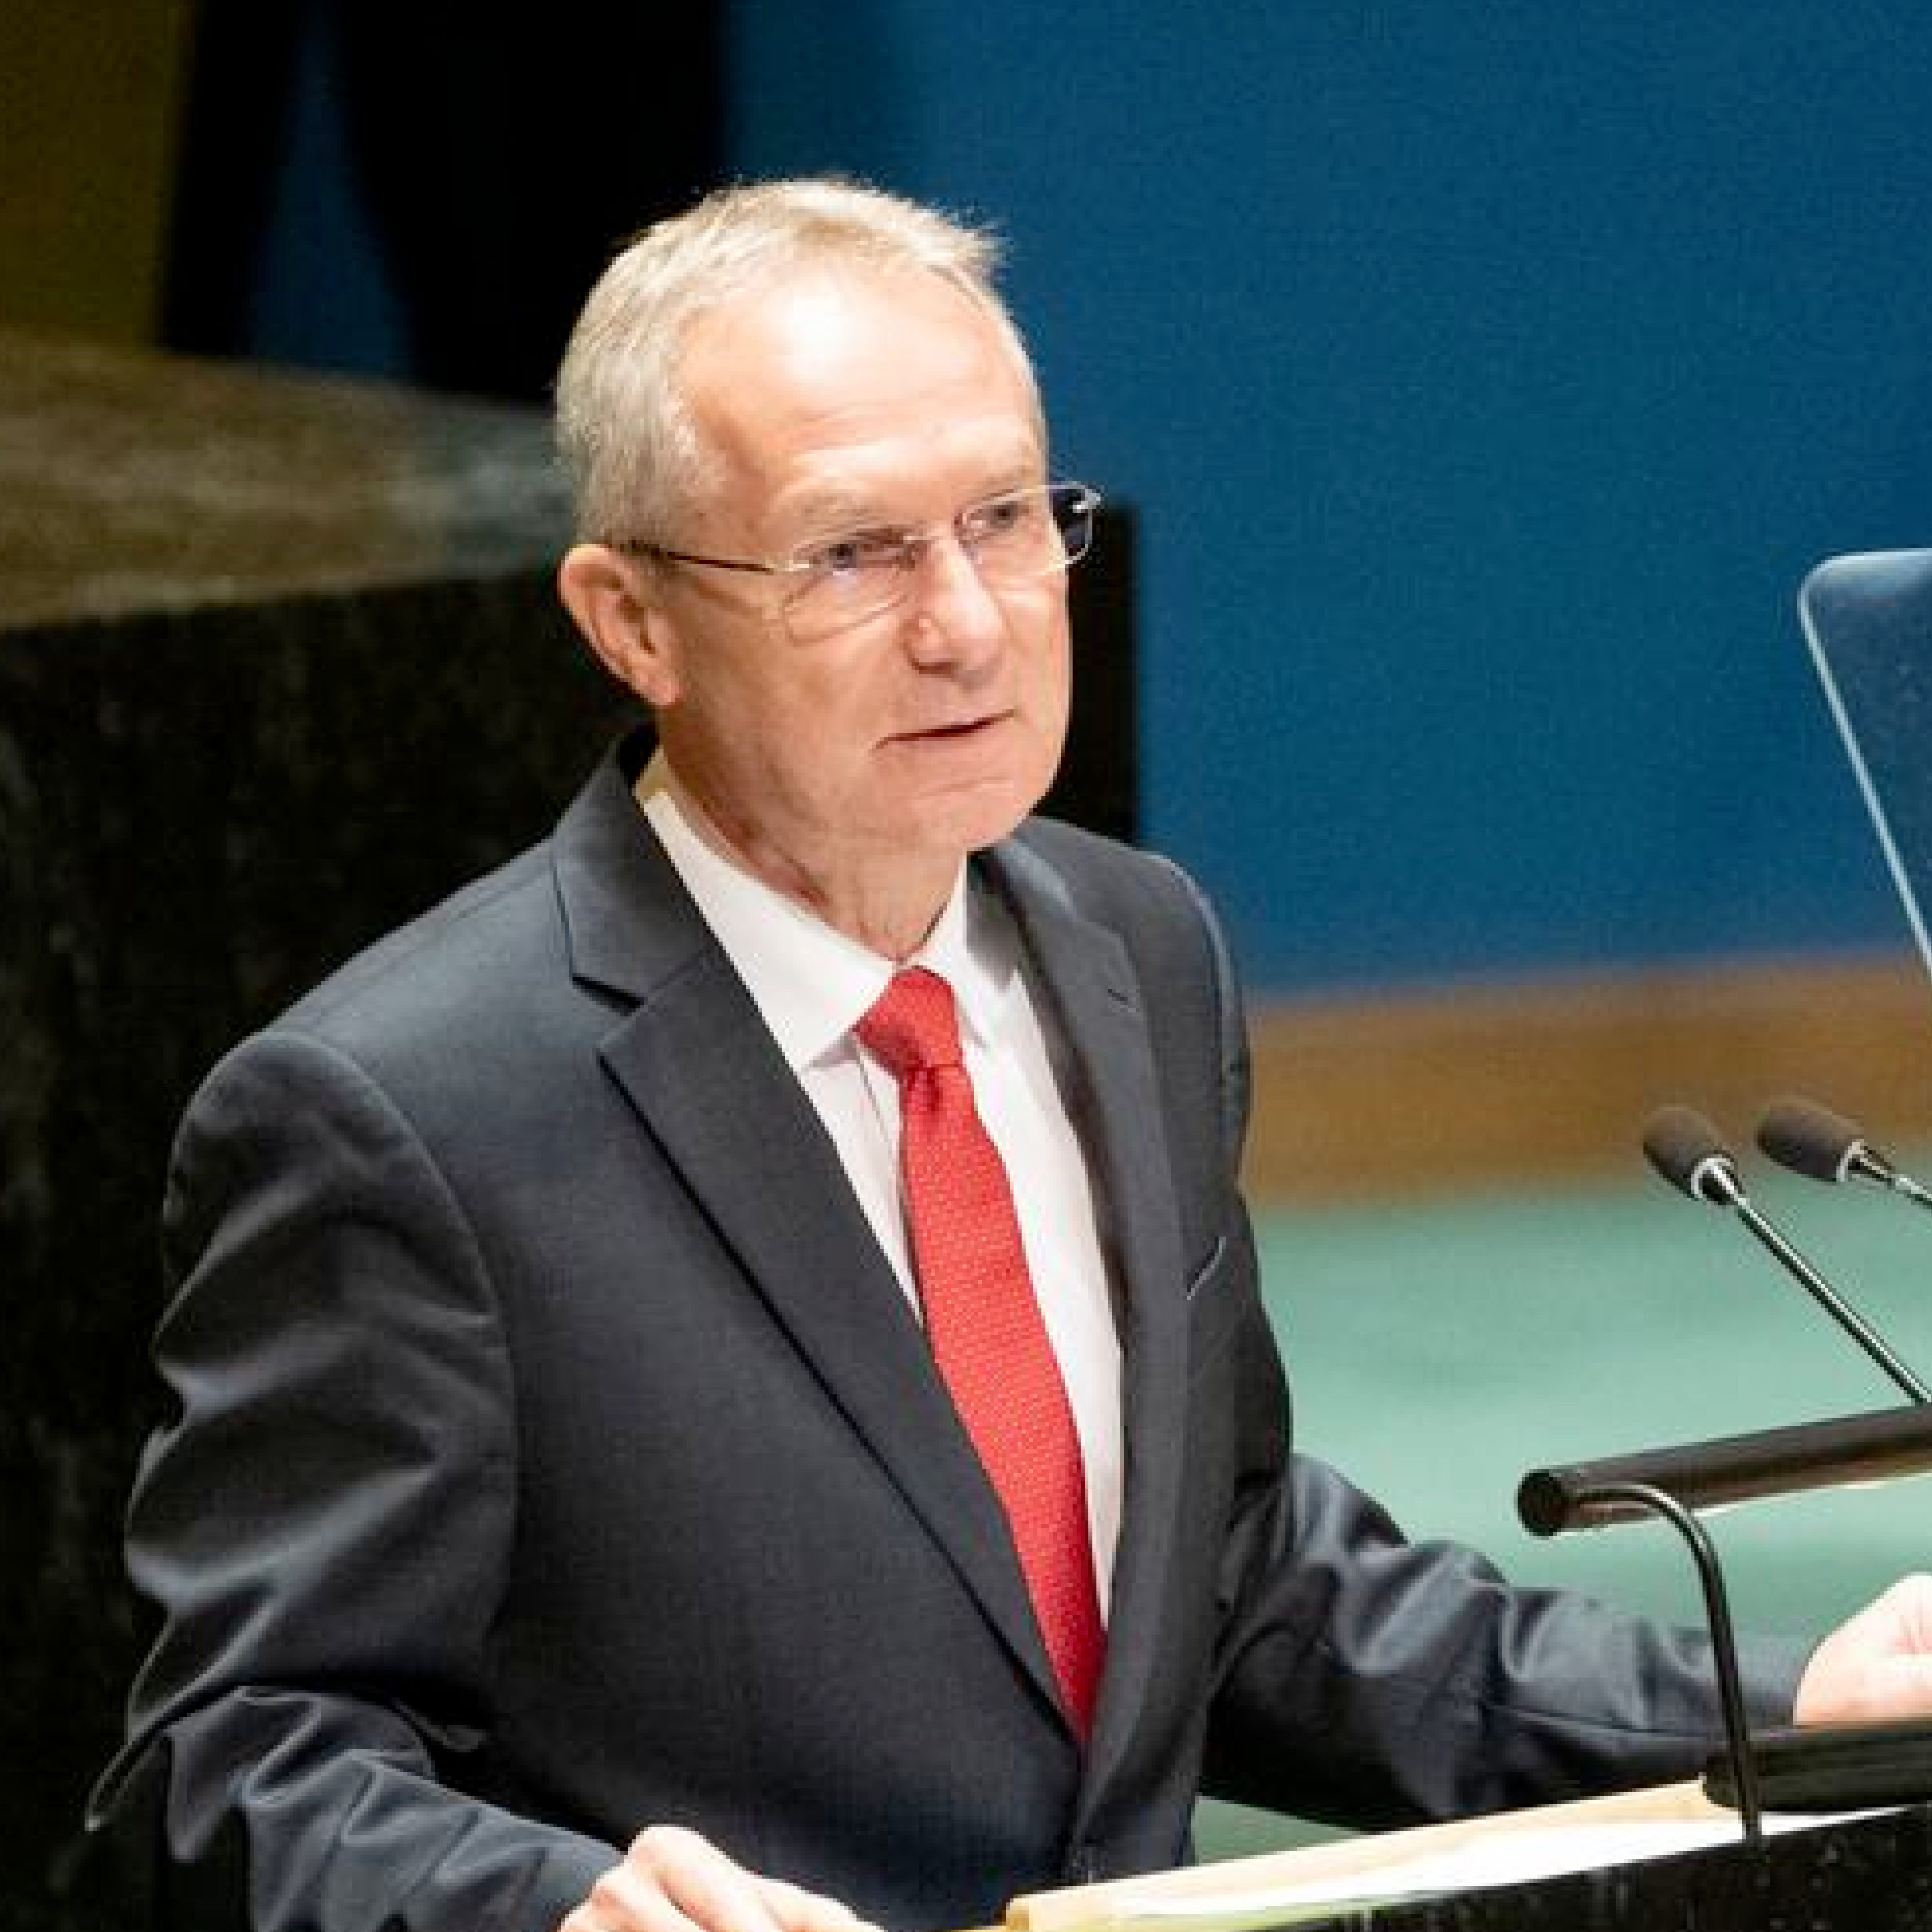 Csaba Kőrösi, President of the 77th session of the United Nations General Assembly, addresses the first plenary meeting of the session.